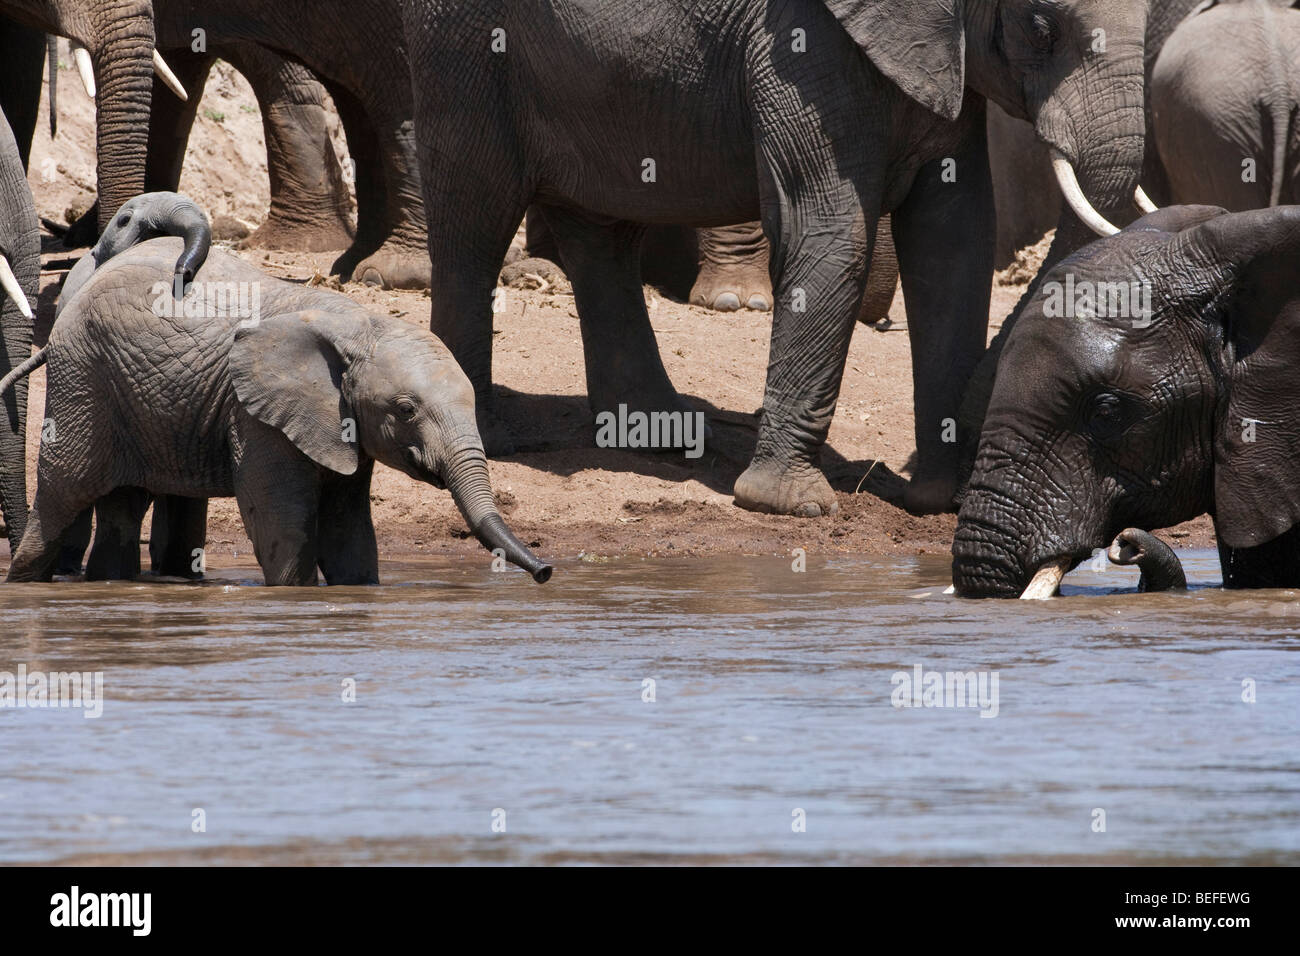 2 cute funny baby elephants play together in water at riverbank, 1 climbing on other, with bathing adult, herd background, Masai Mara Kenya Africa Stock Photo